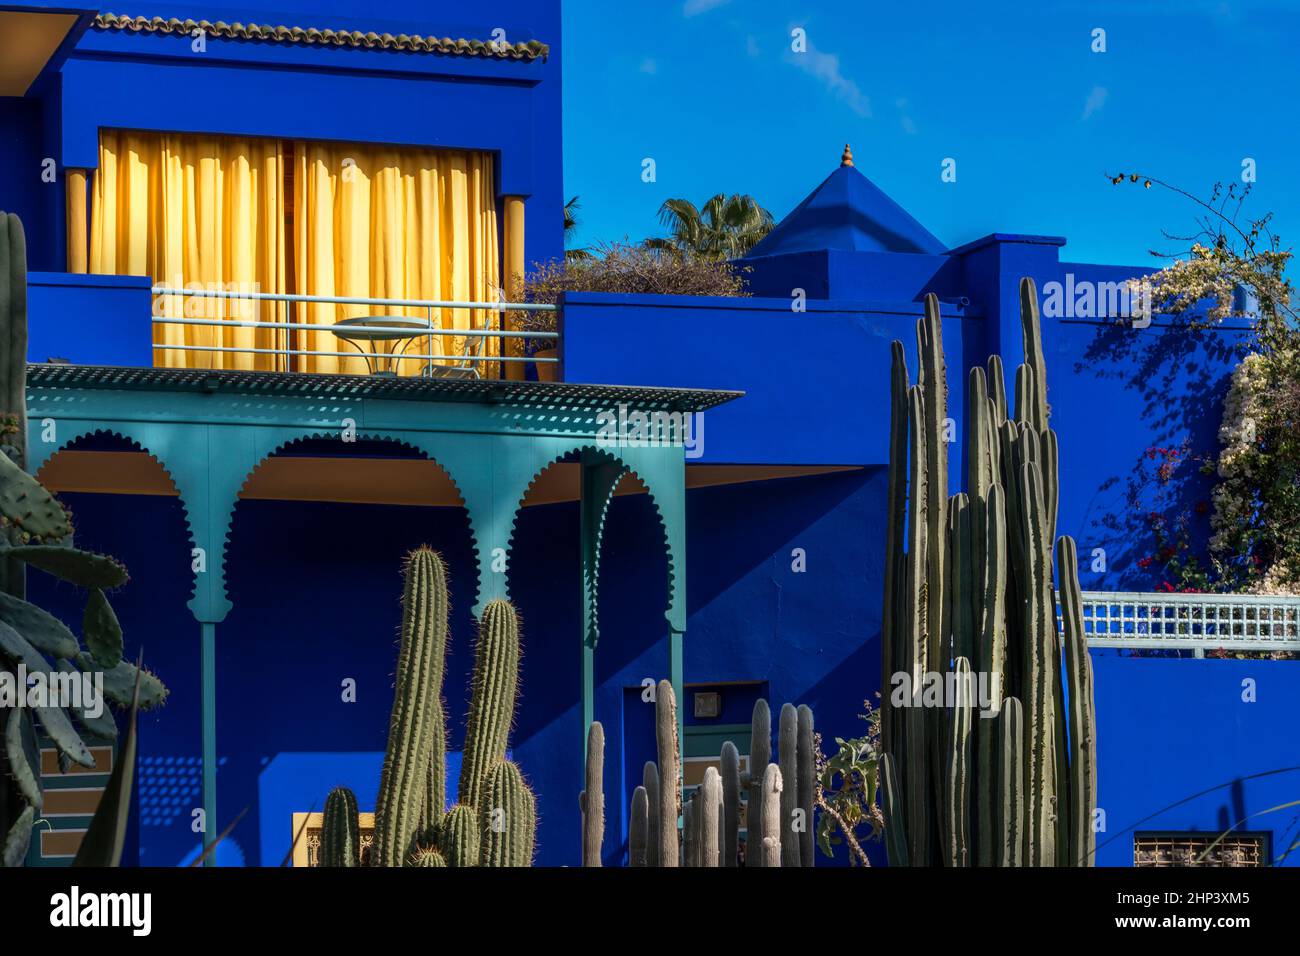 MOROCCO MARRAKESH THE MAJORELLE GARDEN حديقة ماجوريل  HOUSE WITH COBALT BLUE WALLS  BRIGHT YELLOW CURTAINS AND CACTI Stock Photo